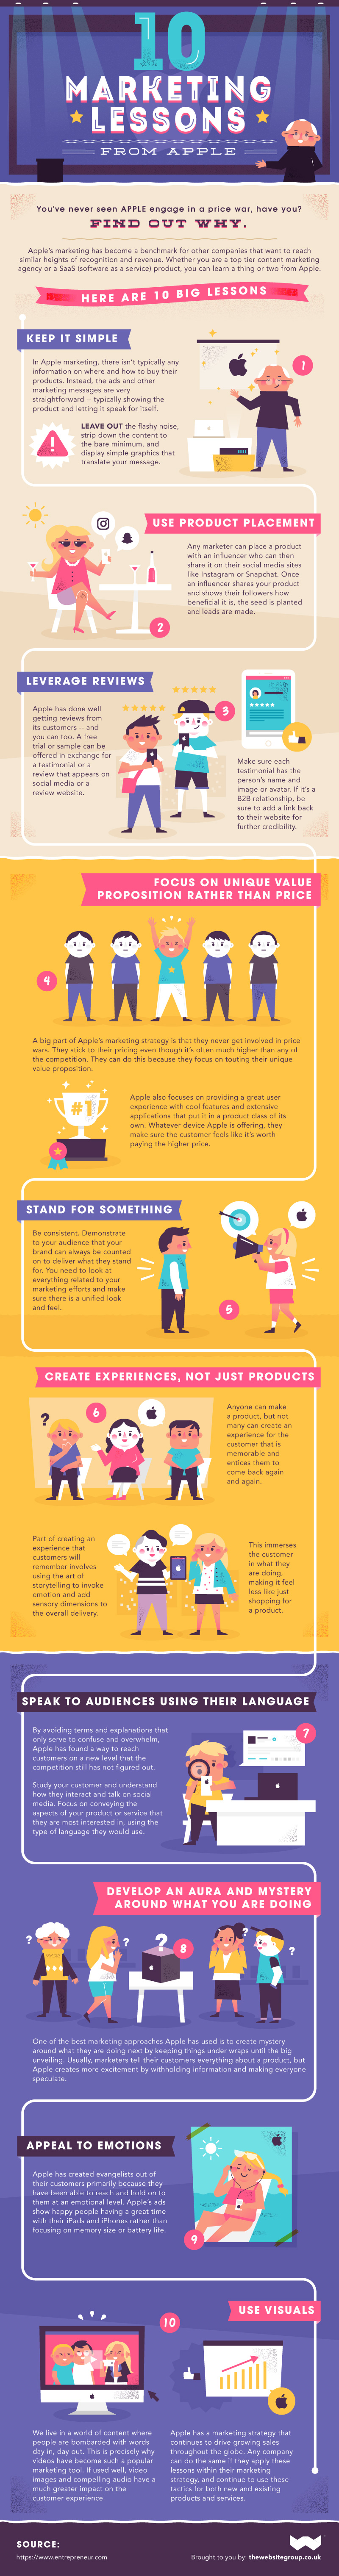 10-Marketing-Lessons-from-Apple-Infographic